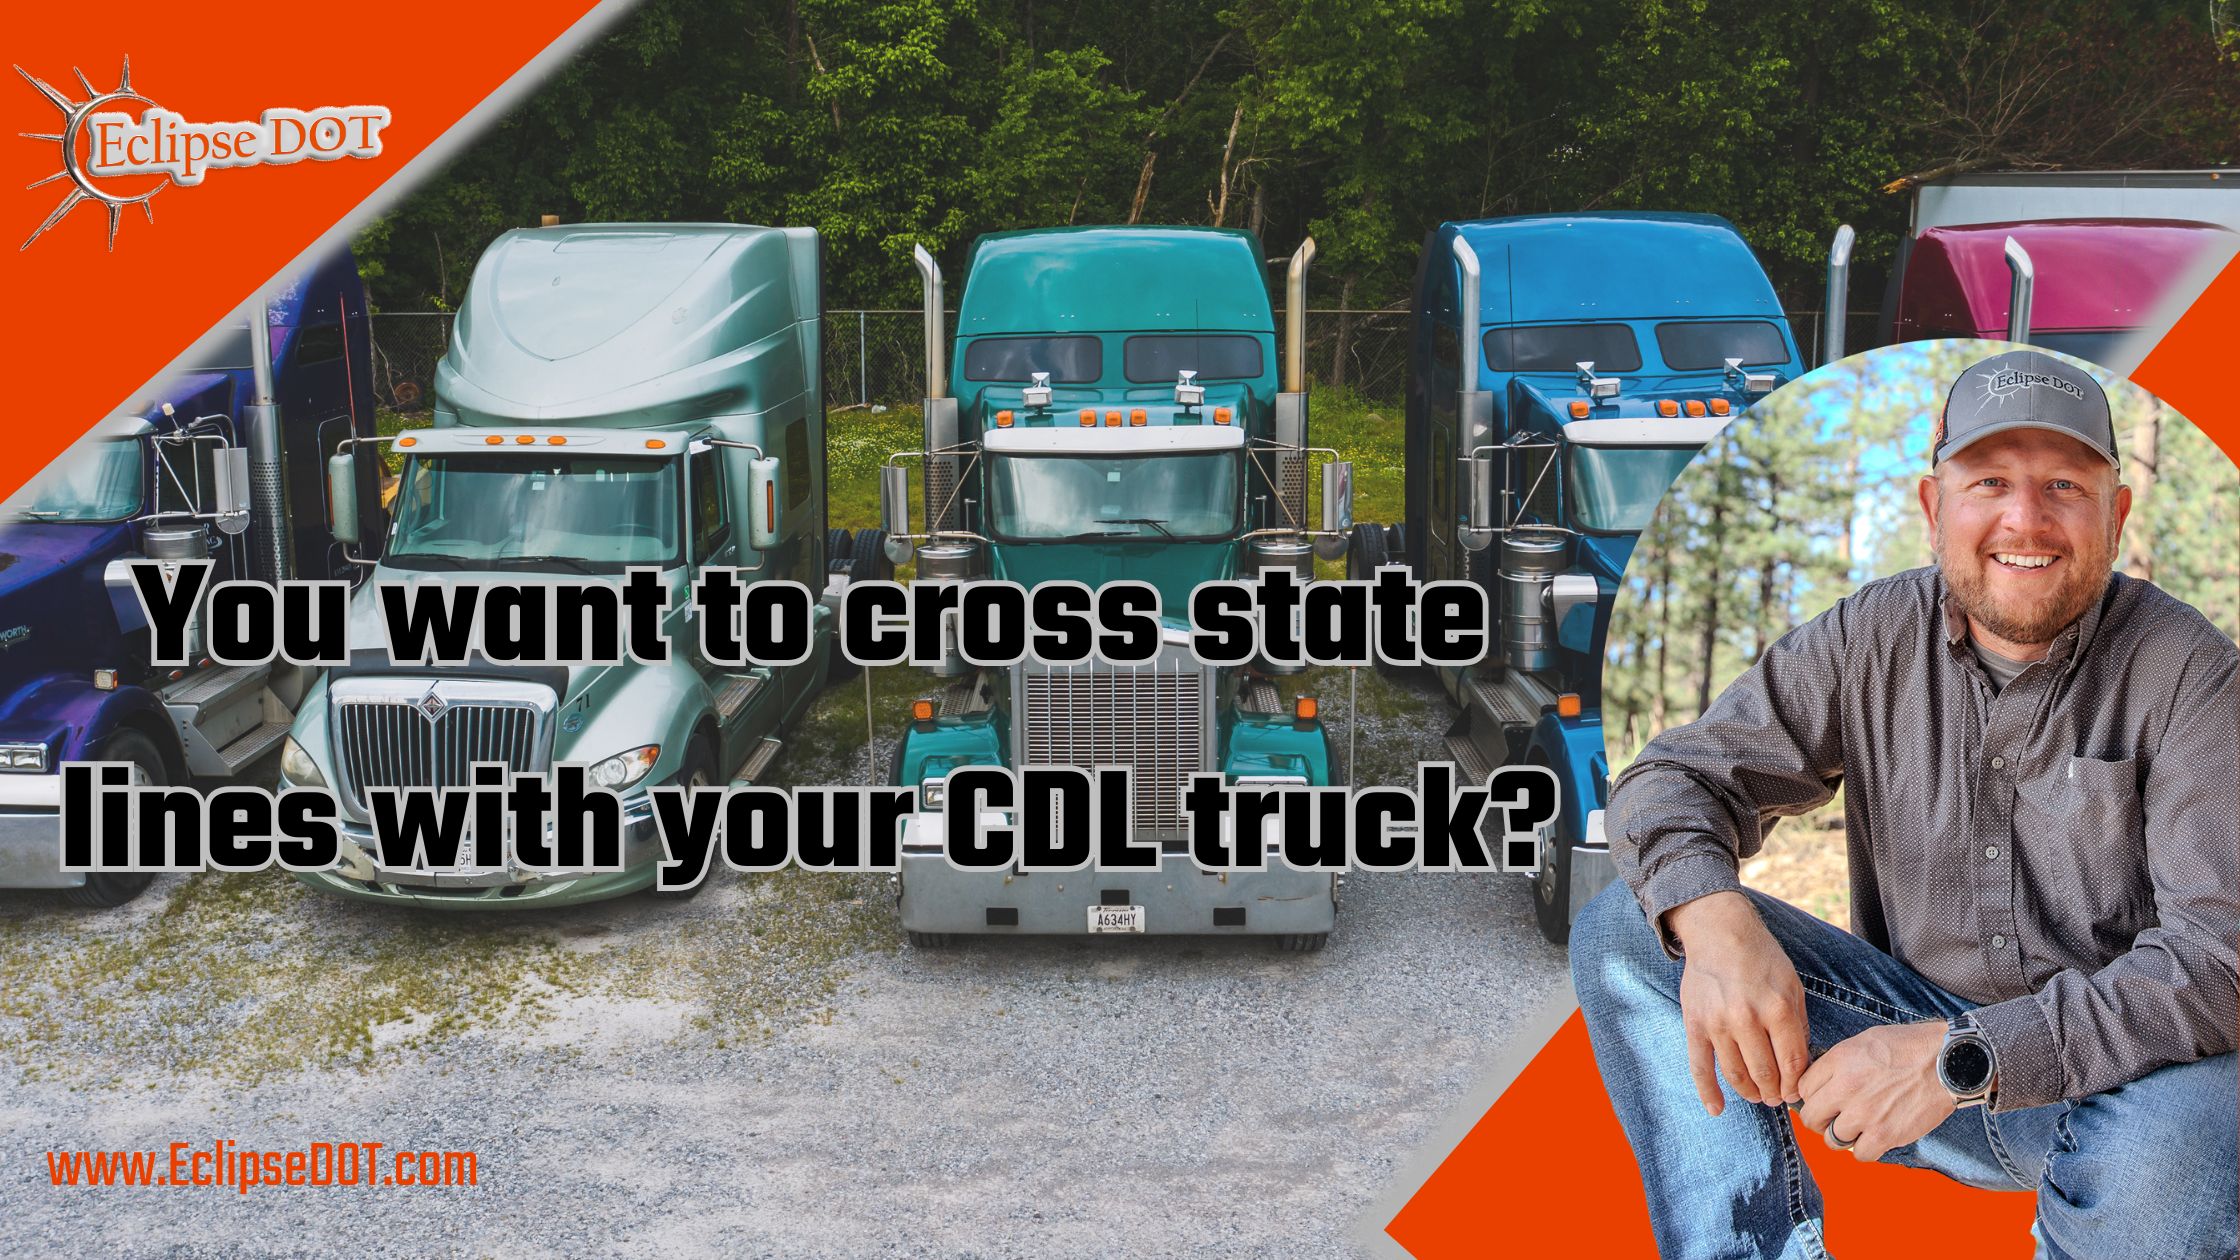 CDL truck crossing state lines with ease